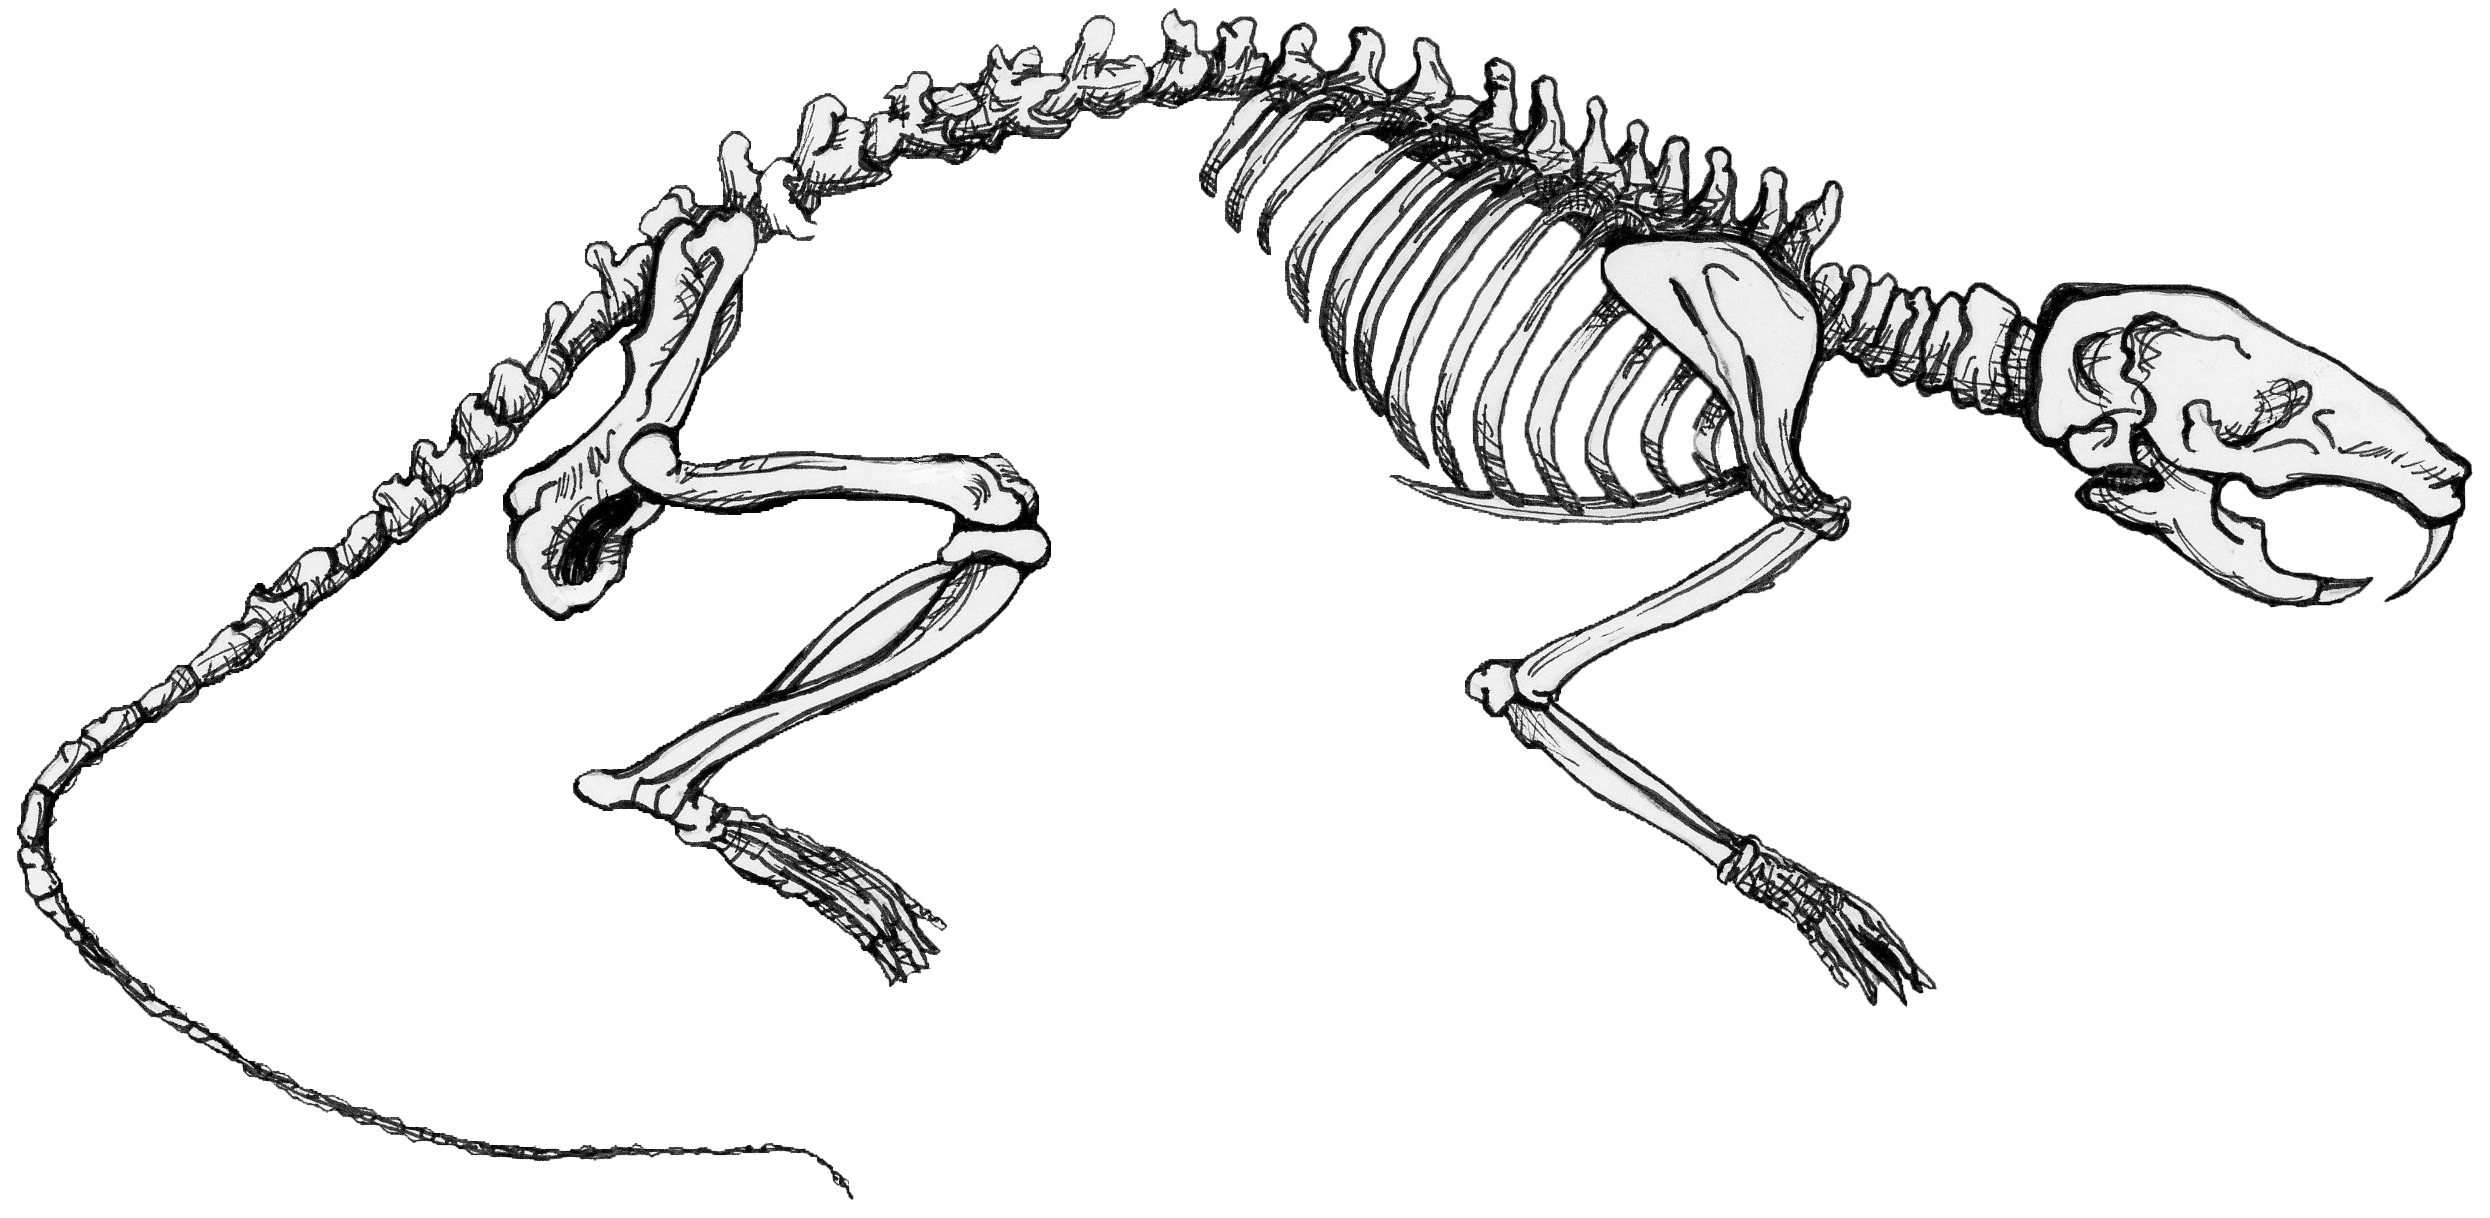 Side-view of a mouse skeleton.